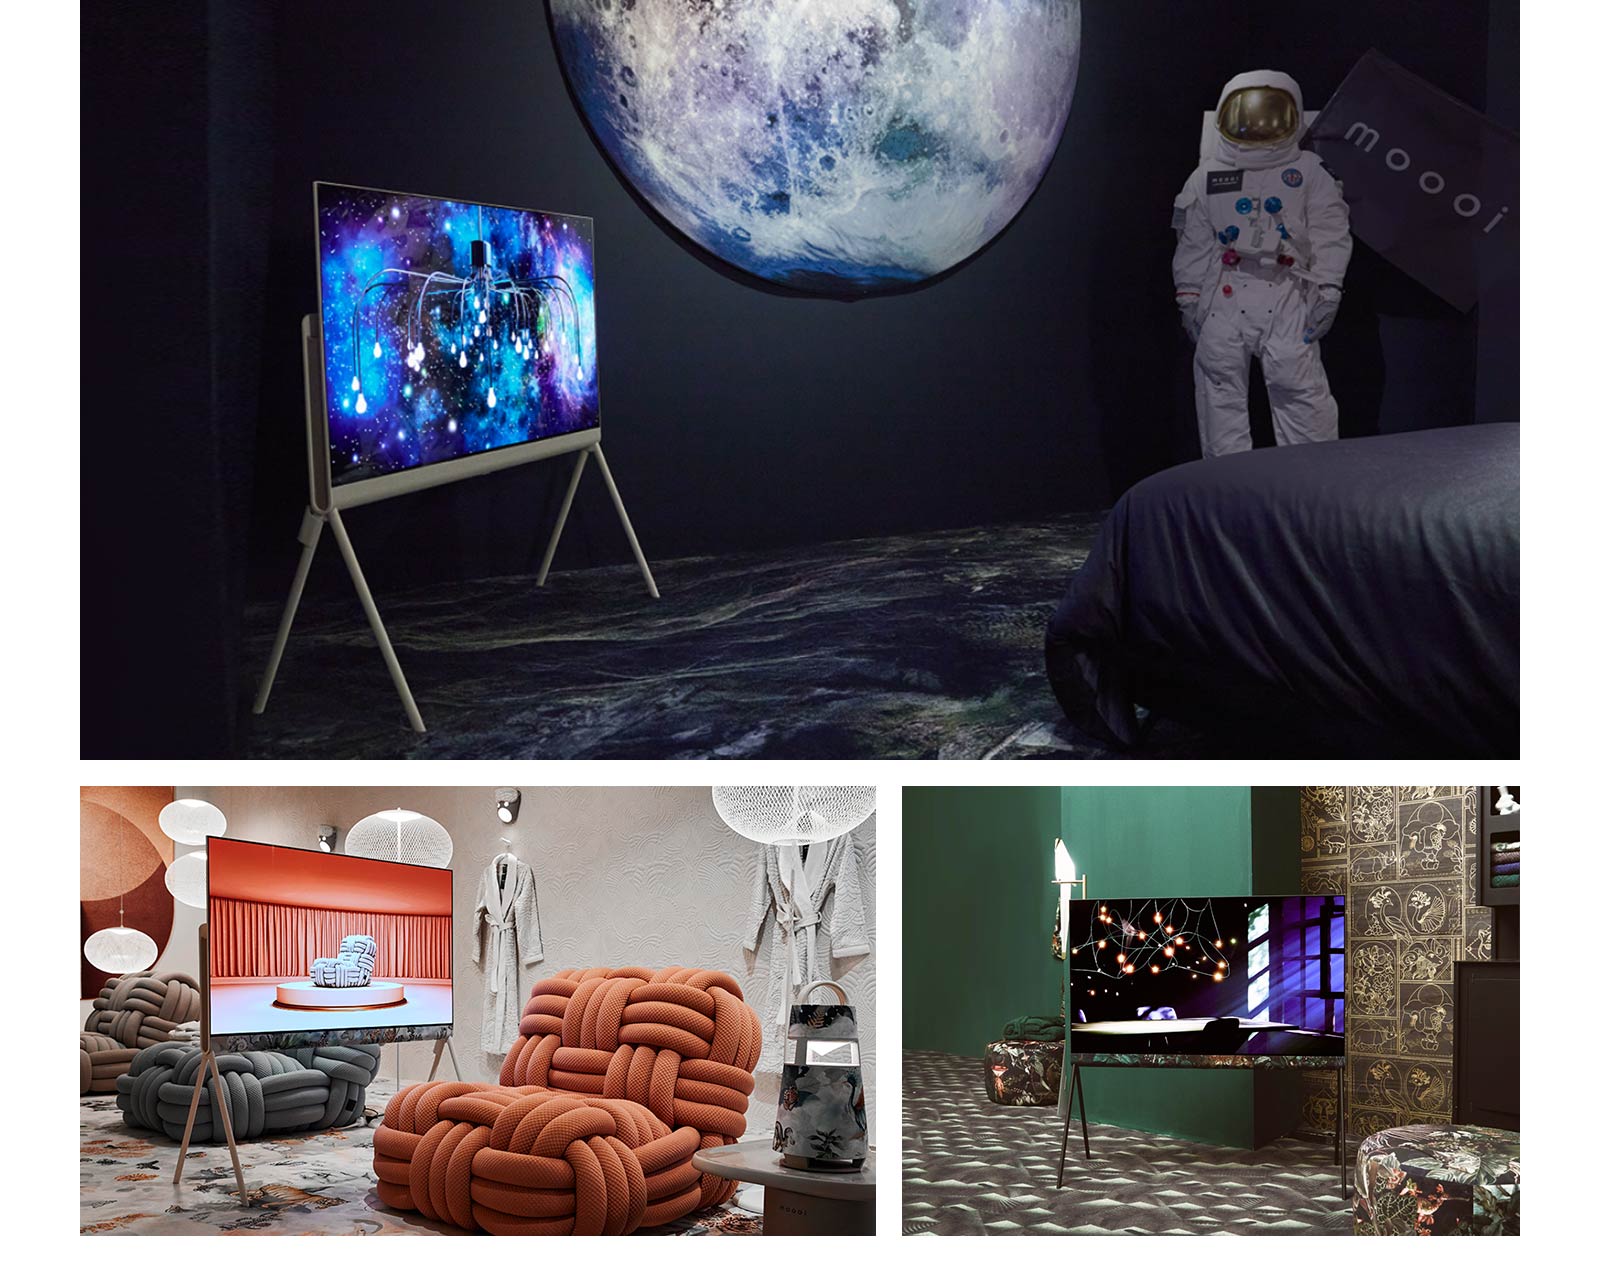 The top image shows Posé in a black space-themed room with an abstract intergalactic artwork on display. The room also has a picture of a moon and an astronaut. 	  The bottom right image shows Posé in an opulent emerald green room. The TV shows light casting over a table through windowpanes on the screen. The room also features black and gold ornate tiles and black floral patterned textile stools. The bottom left image shows Posé in a cream room with hints of colors. The room has terracotta and charcoal-colored chunky woven sofa chairs, white ball-shaped light fixtures, and bathing robes hanging on the wall. The TV shows an image of the same charcoal sofa chair on a platform in a terracotta-colored room.